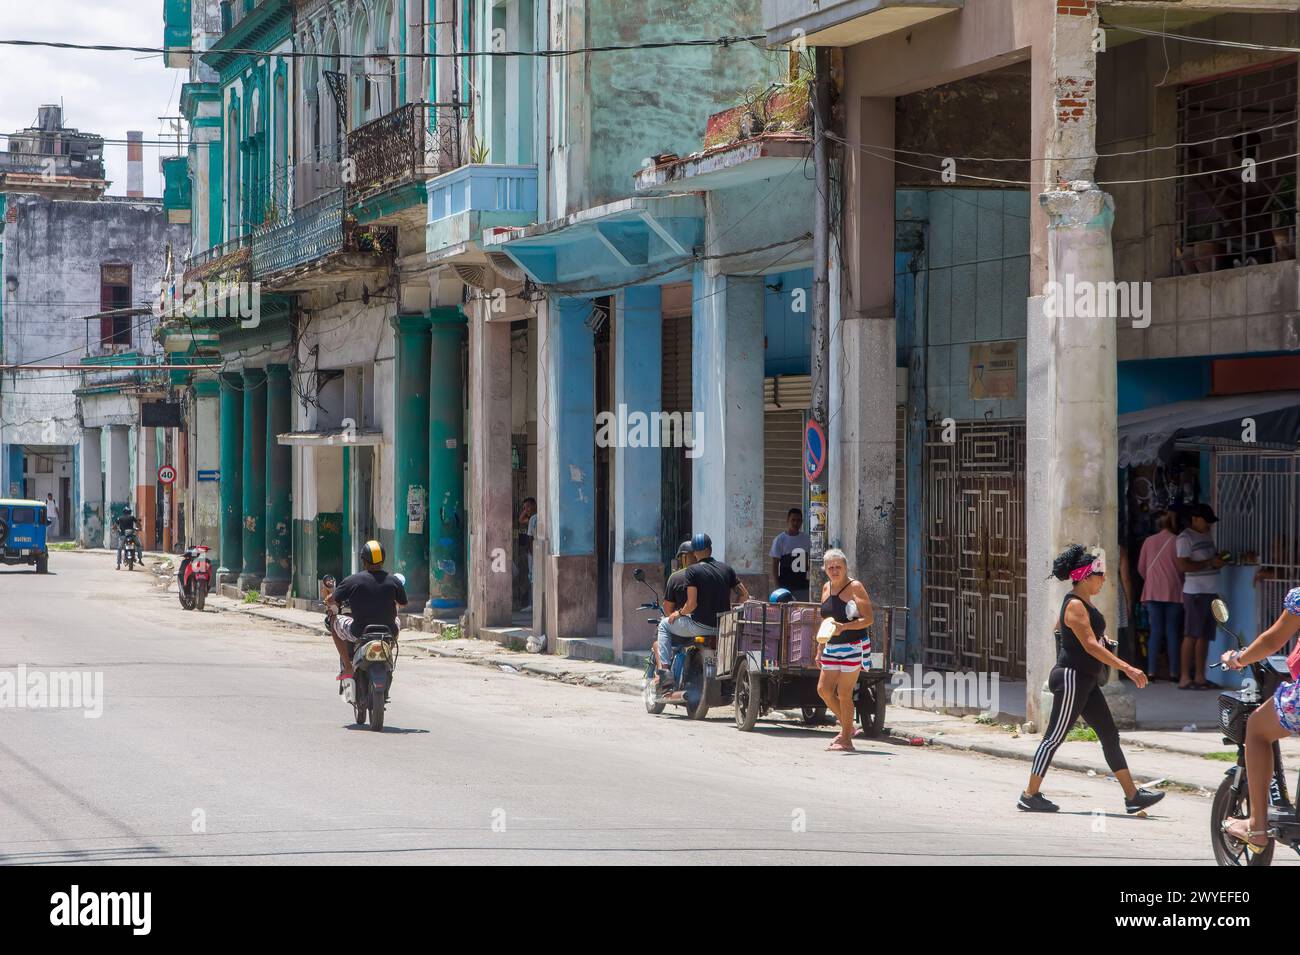 Cuban people daily life by weathered buildings in Havana, Cuba Stock Photo